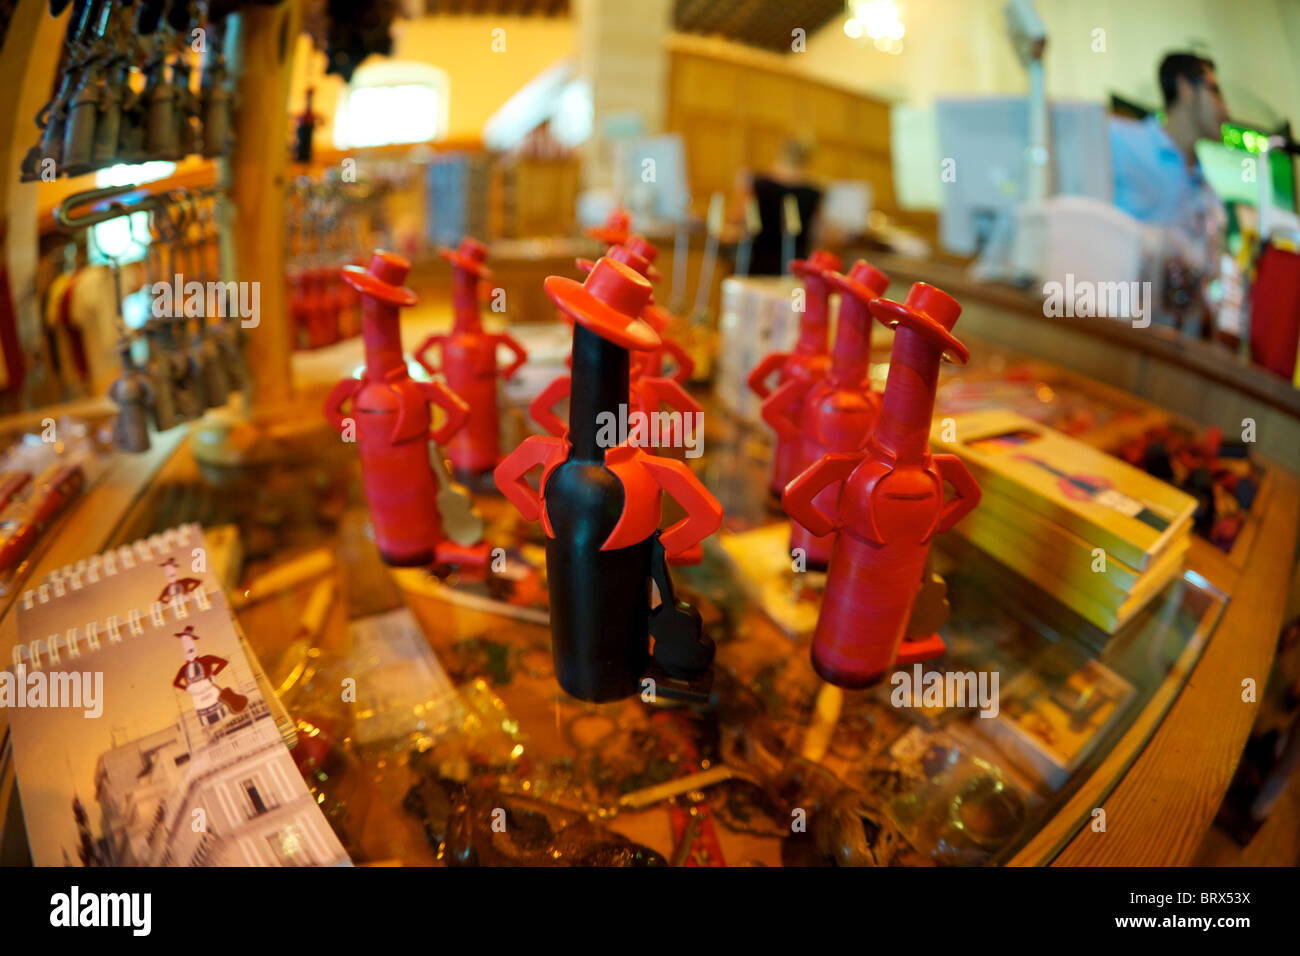 Tio Pepe merchandise for sale in shop in Jerez Spain. Stock Photo